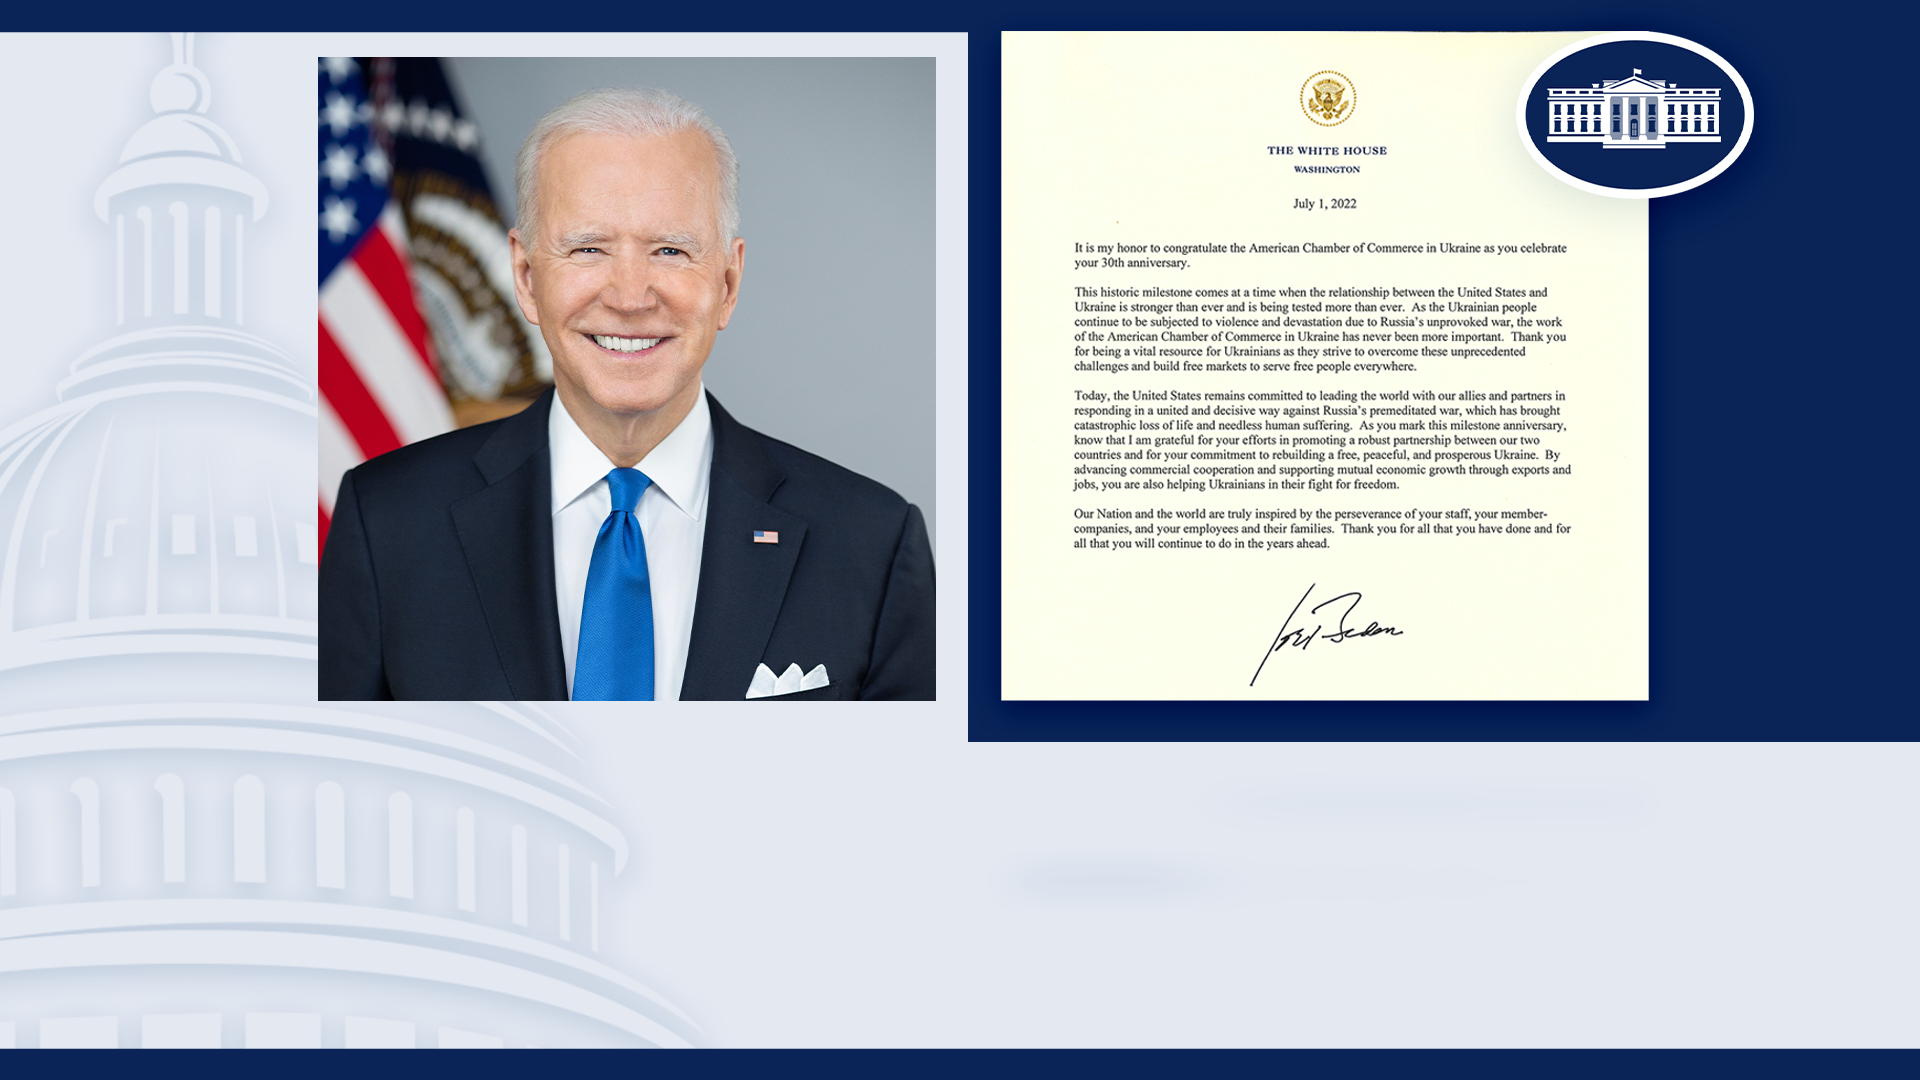 Letter from President Biden to AmCham Ukraine and its members